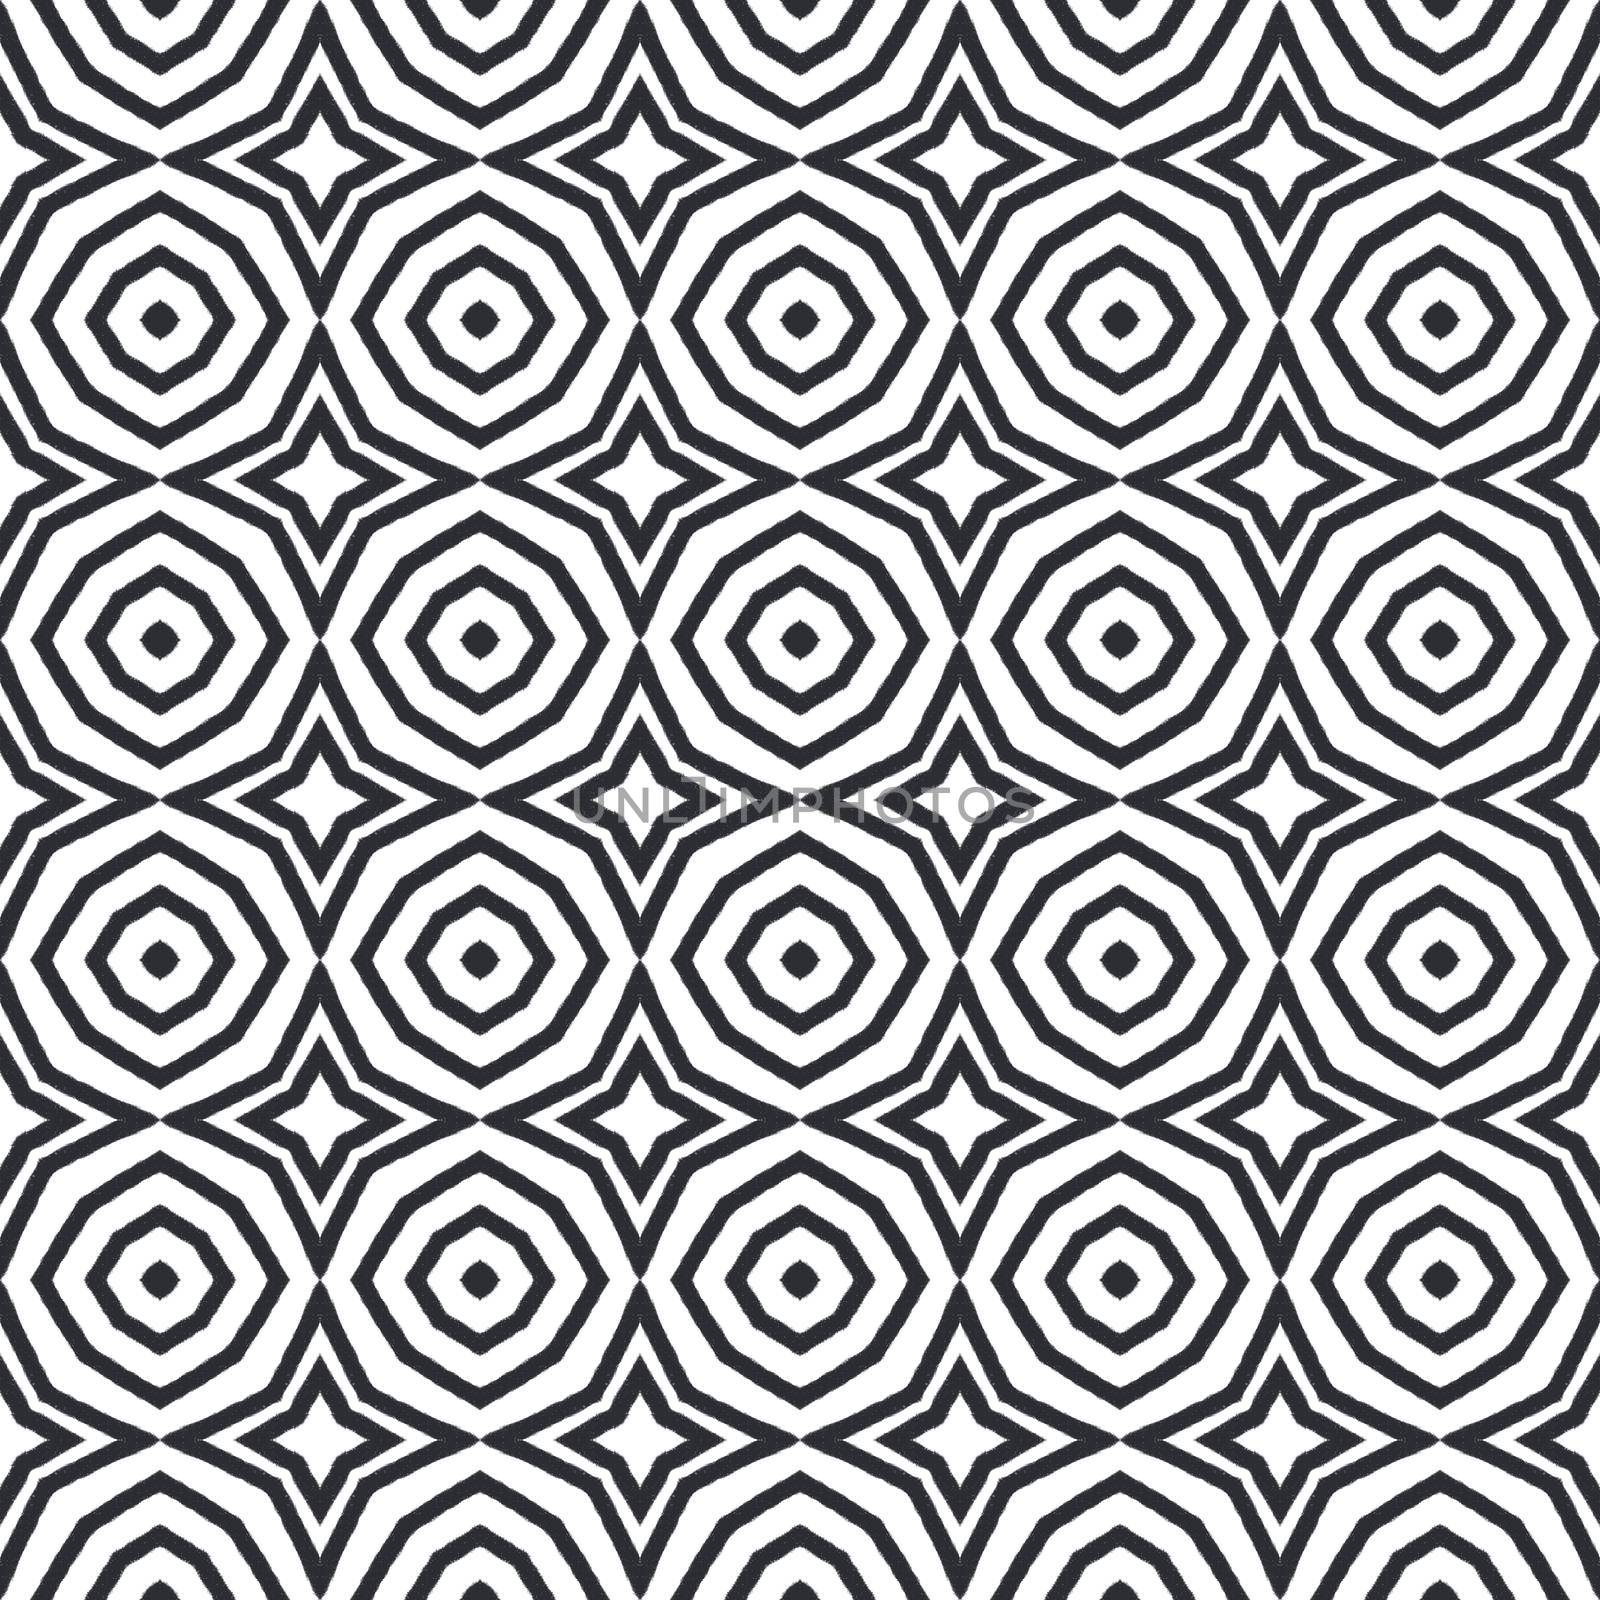 Tiled watercolor pattern. Black symmetrical kaleidoscope background. Hand painted tiled watercolor seamless. Textile ready magnetic print, swimwear fabric, wallpaper, wrapping.